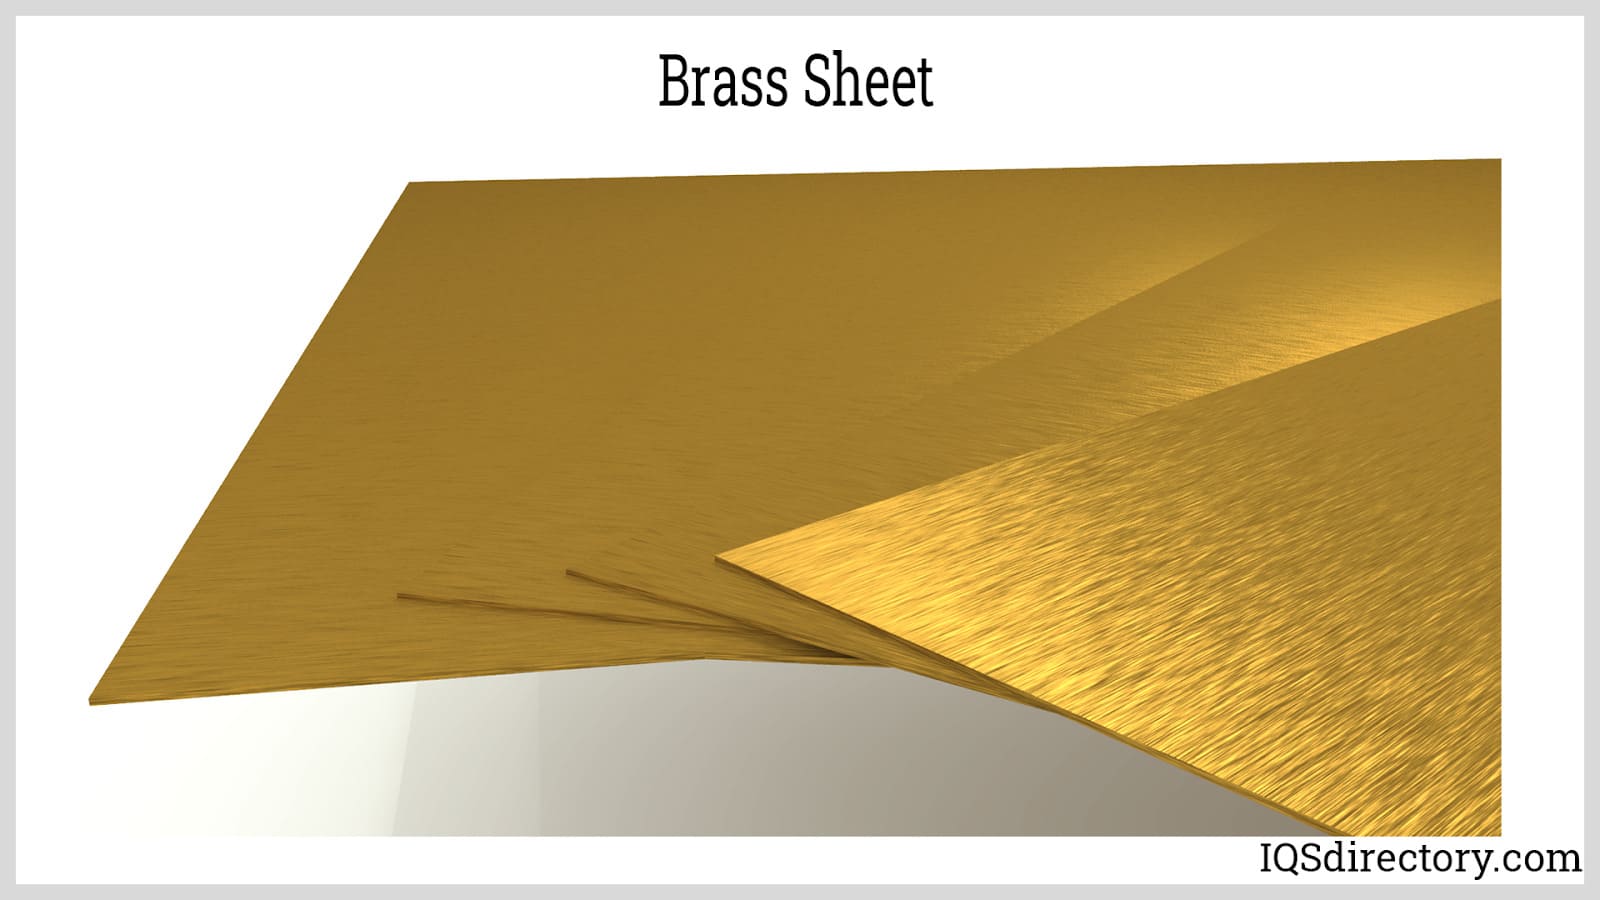 All You Need to Know About Copper Sheets